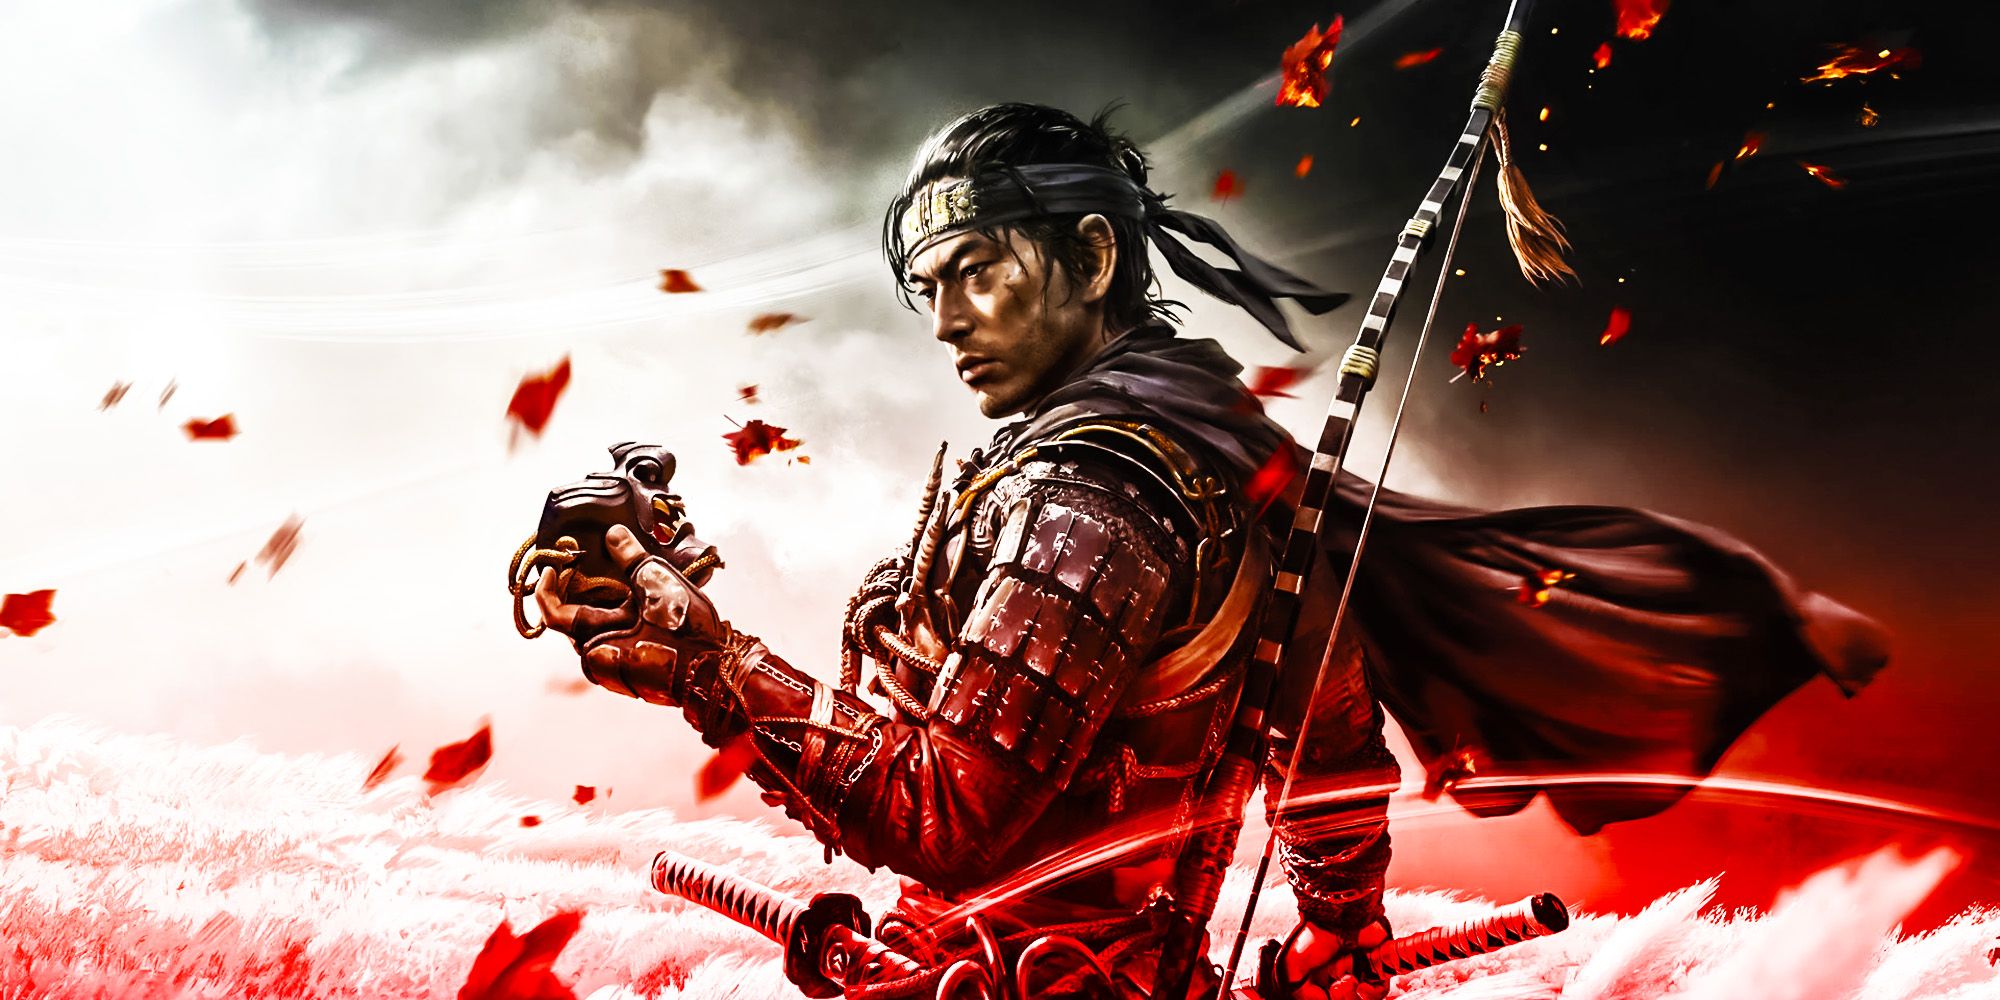 A character with flower petals flying around him in Ghost Of Tsushima.